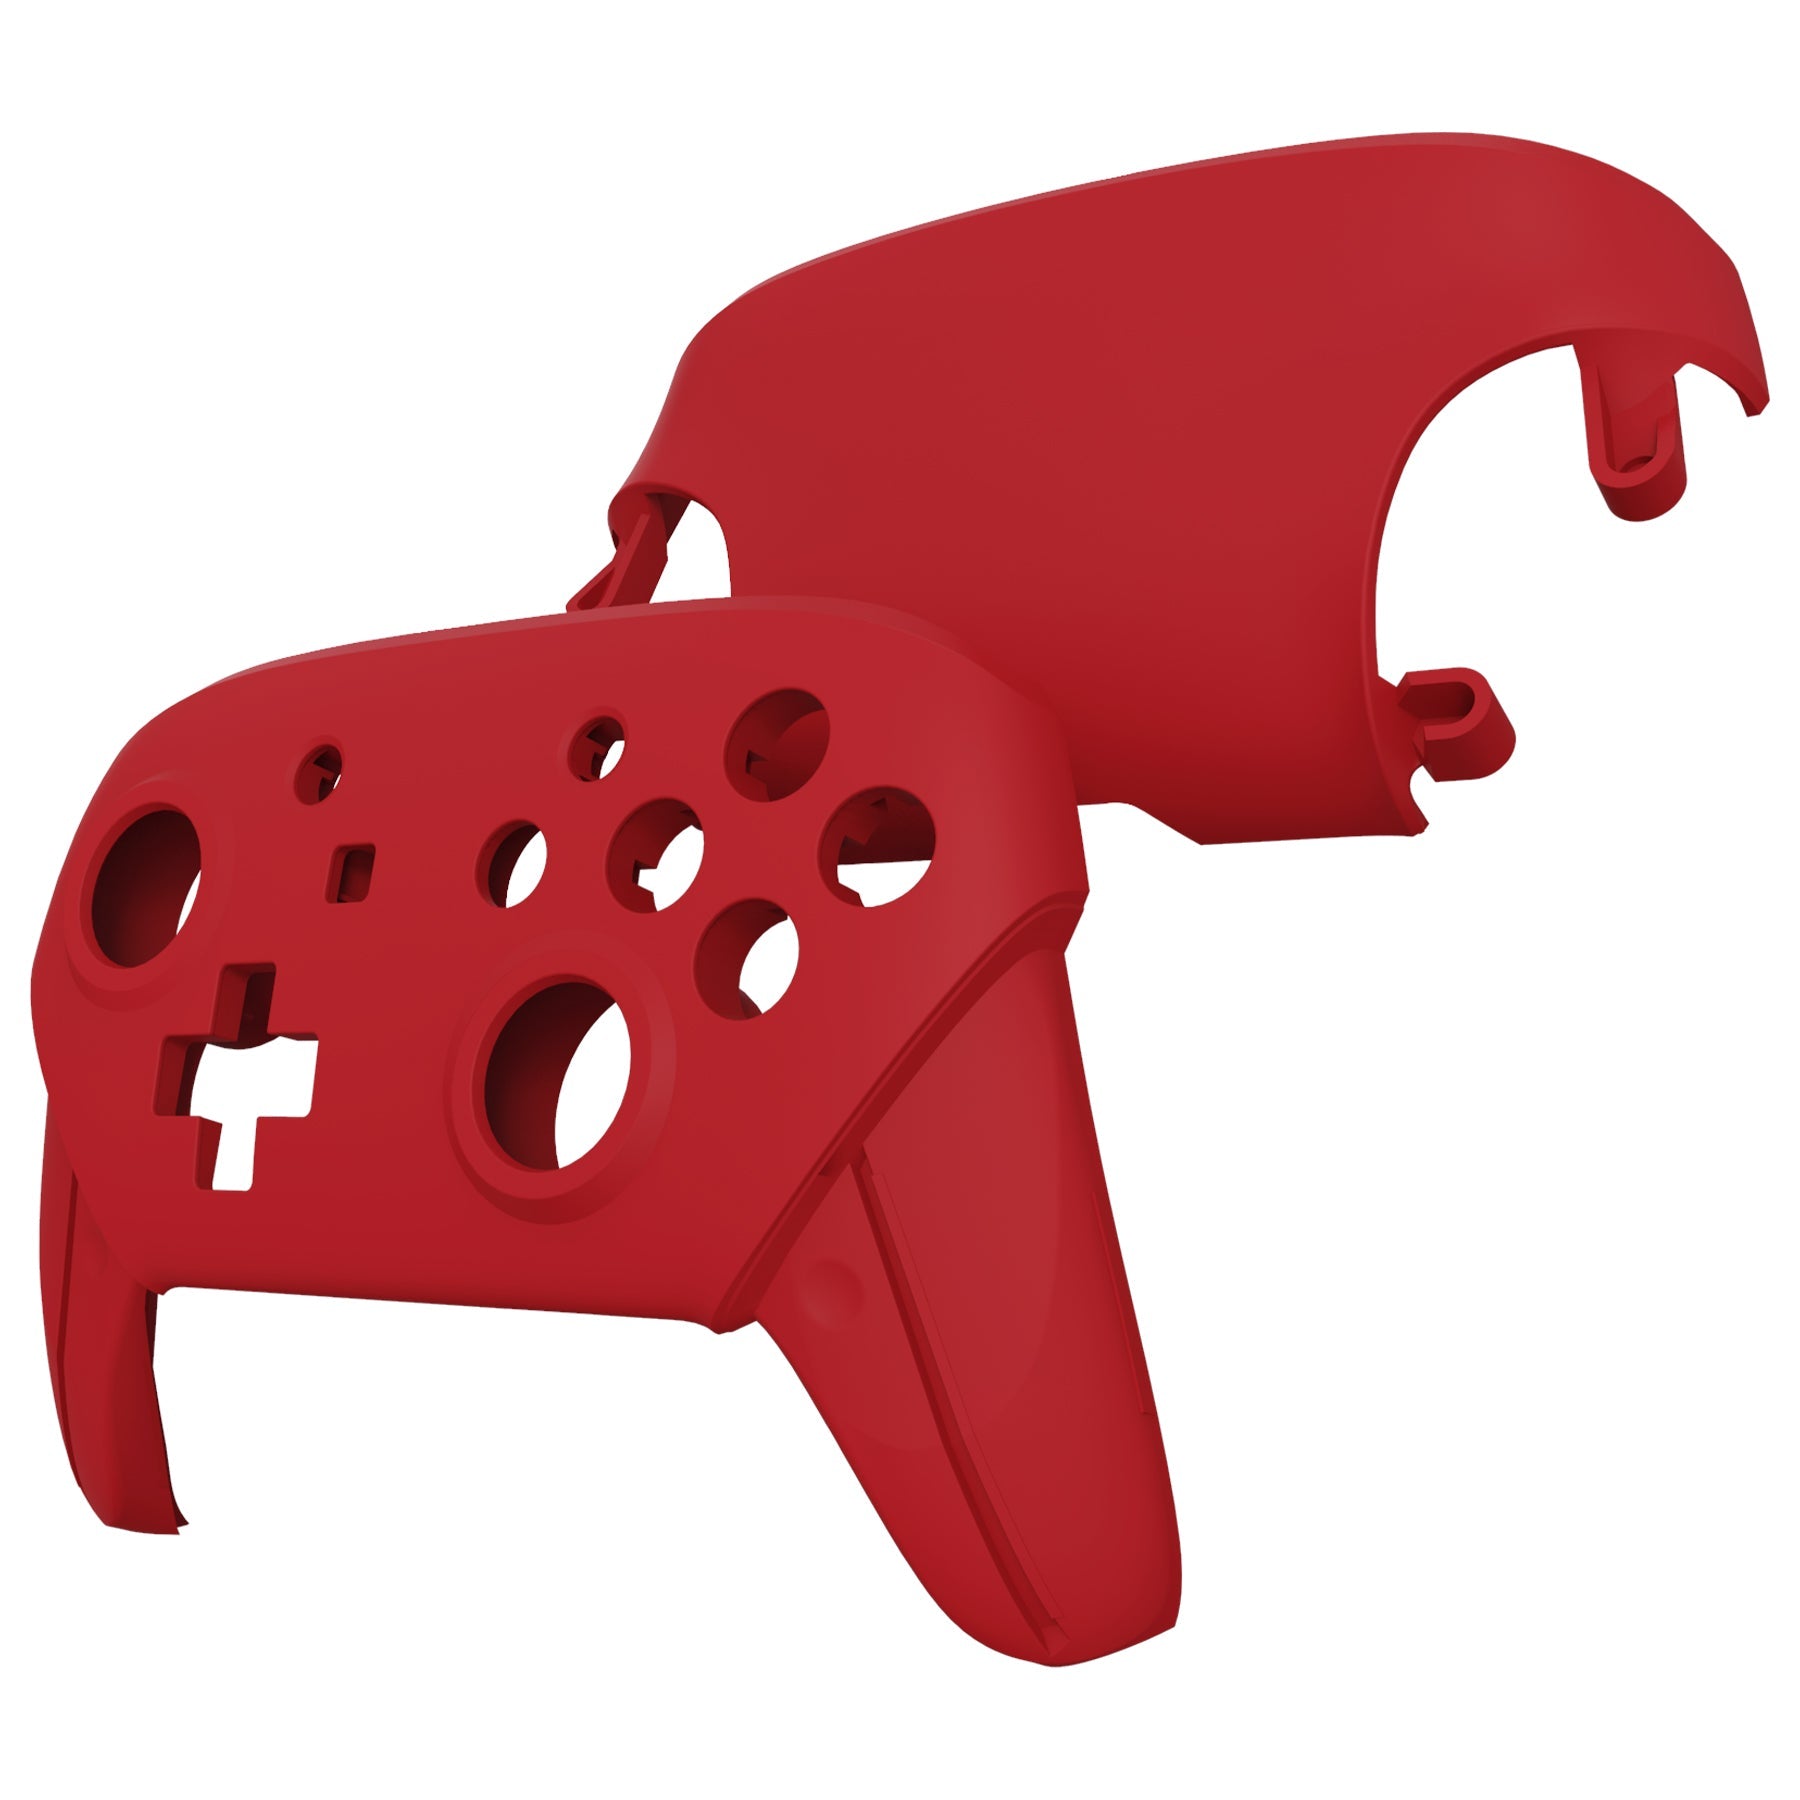 eXtremeRate Retail Passion Red Faceplate and Backplate for NS Switch Pro Controller, Soft Touch DIY Replacement Shell Housing Case for NS Switch Pro Controller - Controller NOT Included - MRP332